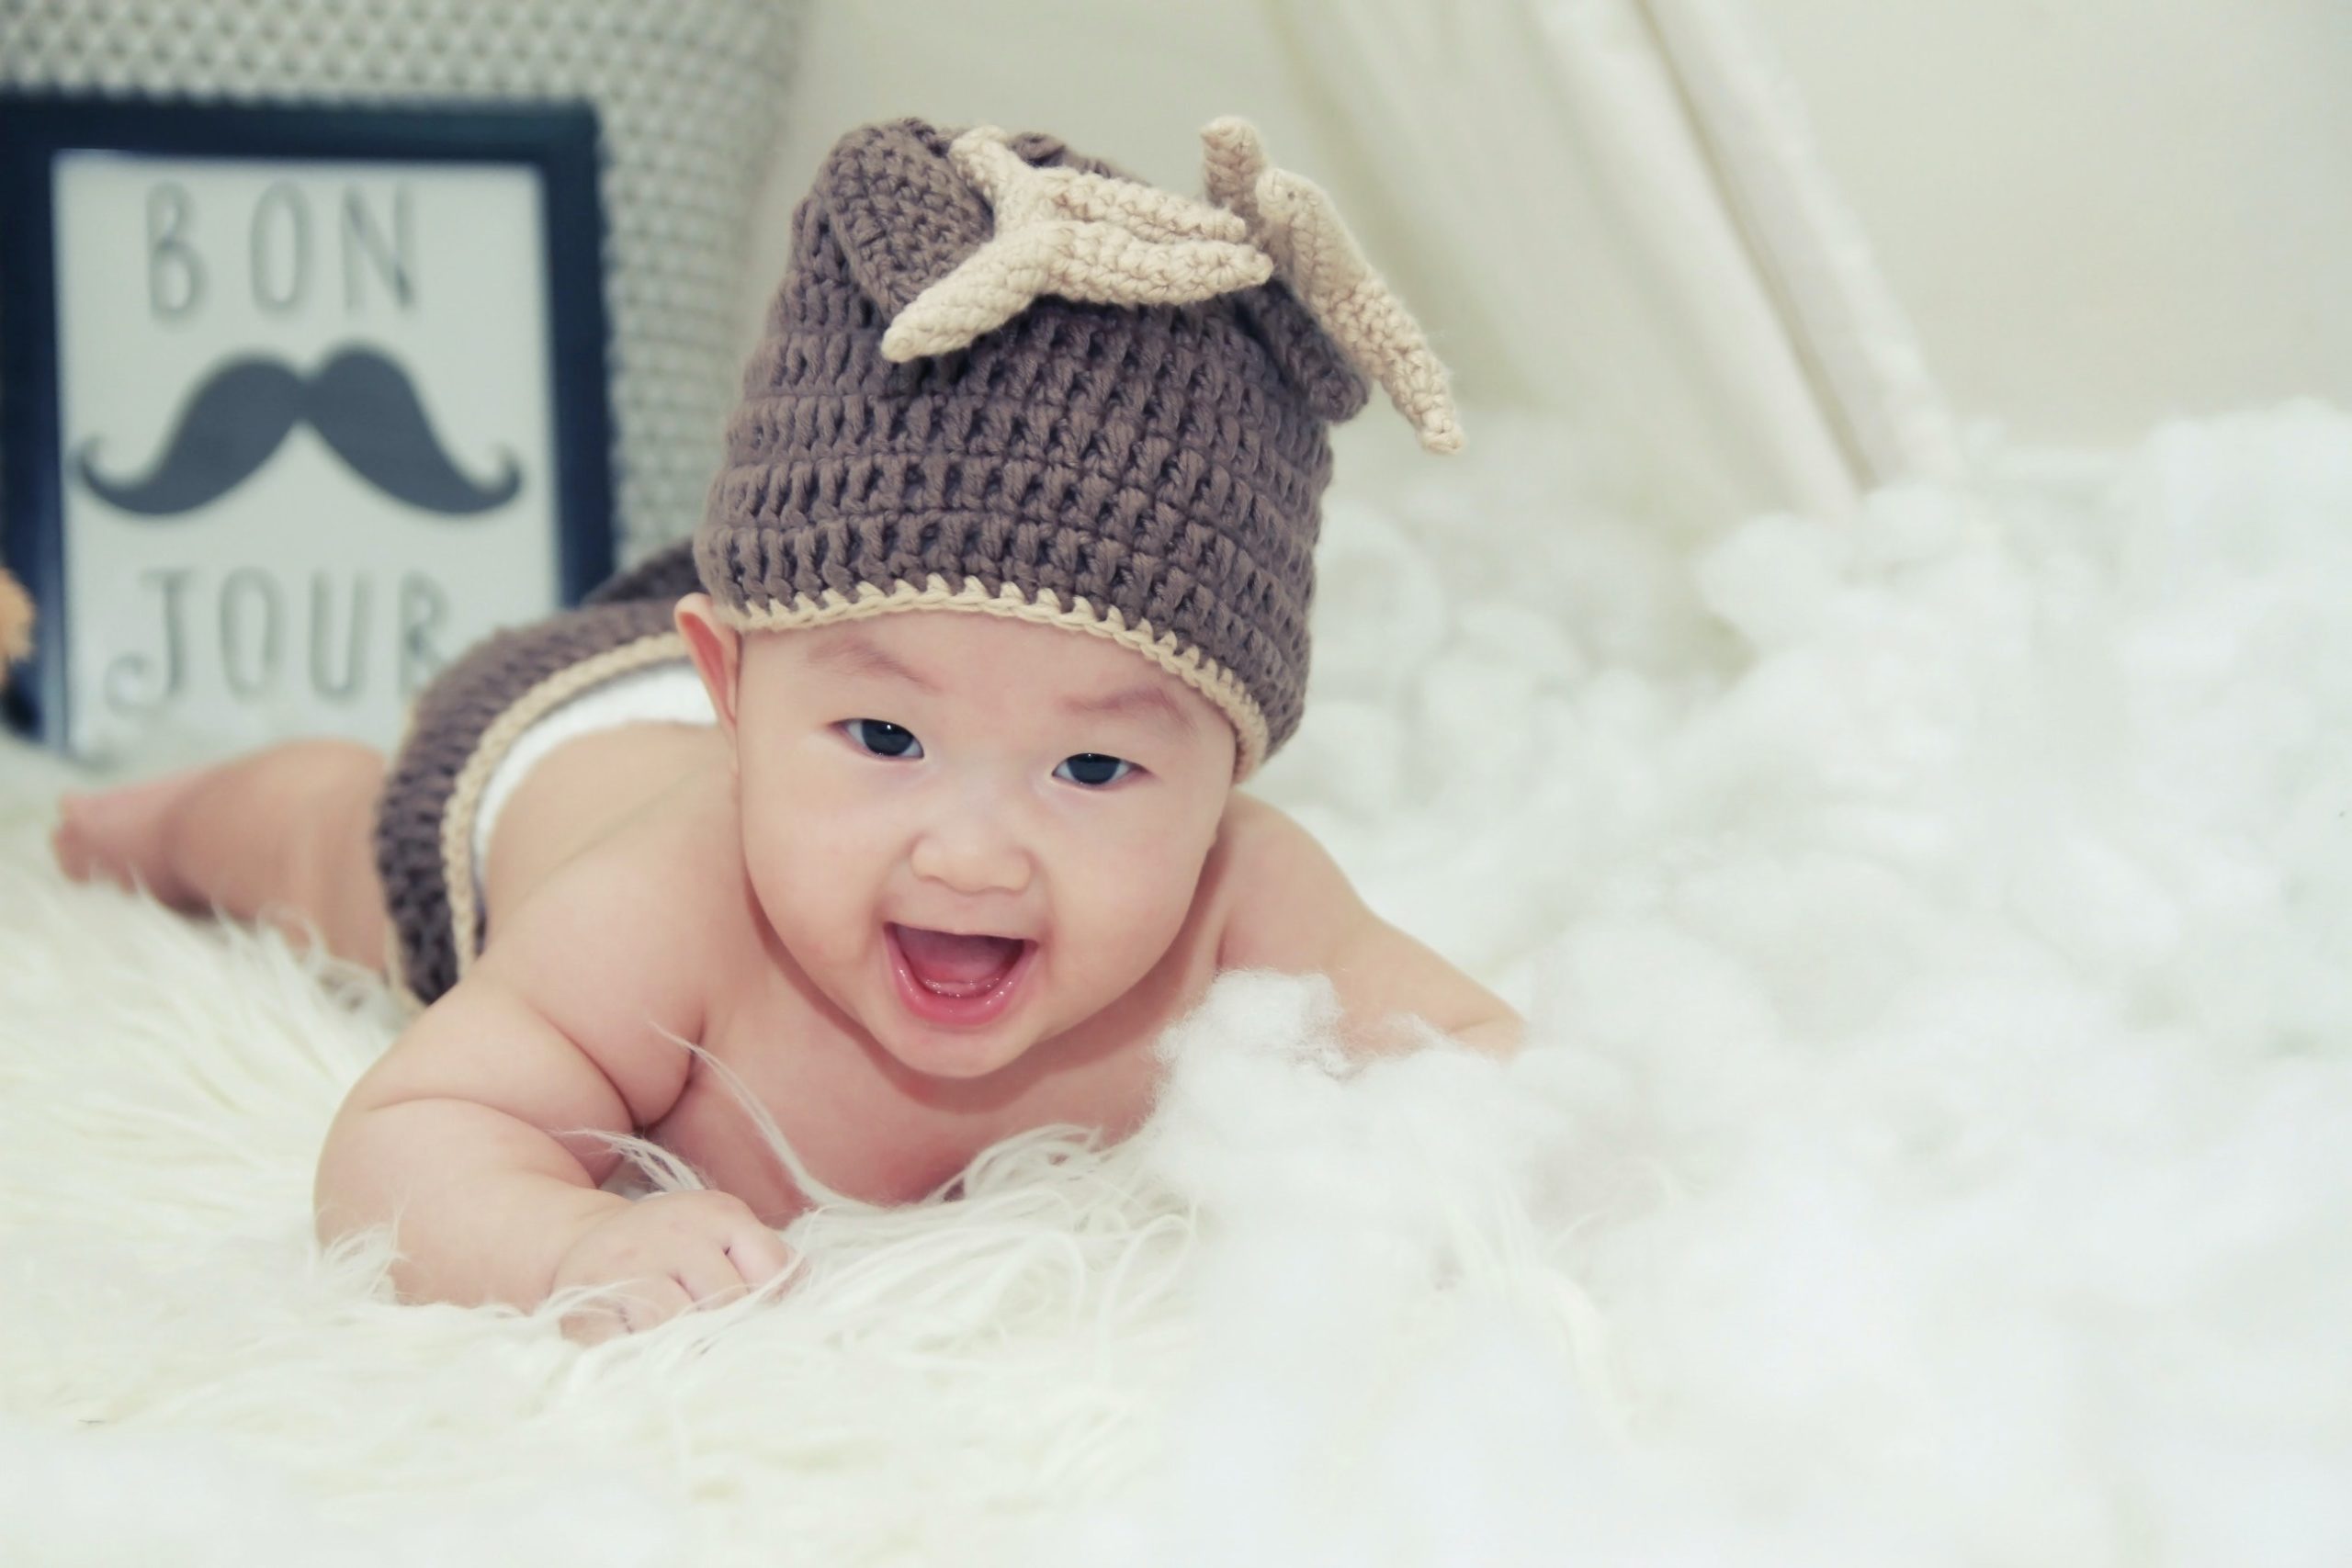 A baby who is wearing a grey knitted hat is lying on a fluffy white surface. A frame with a moustache and the words, "BON JOUR,' is in the background.